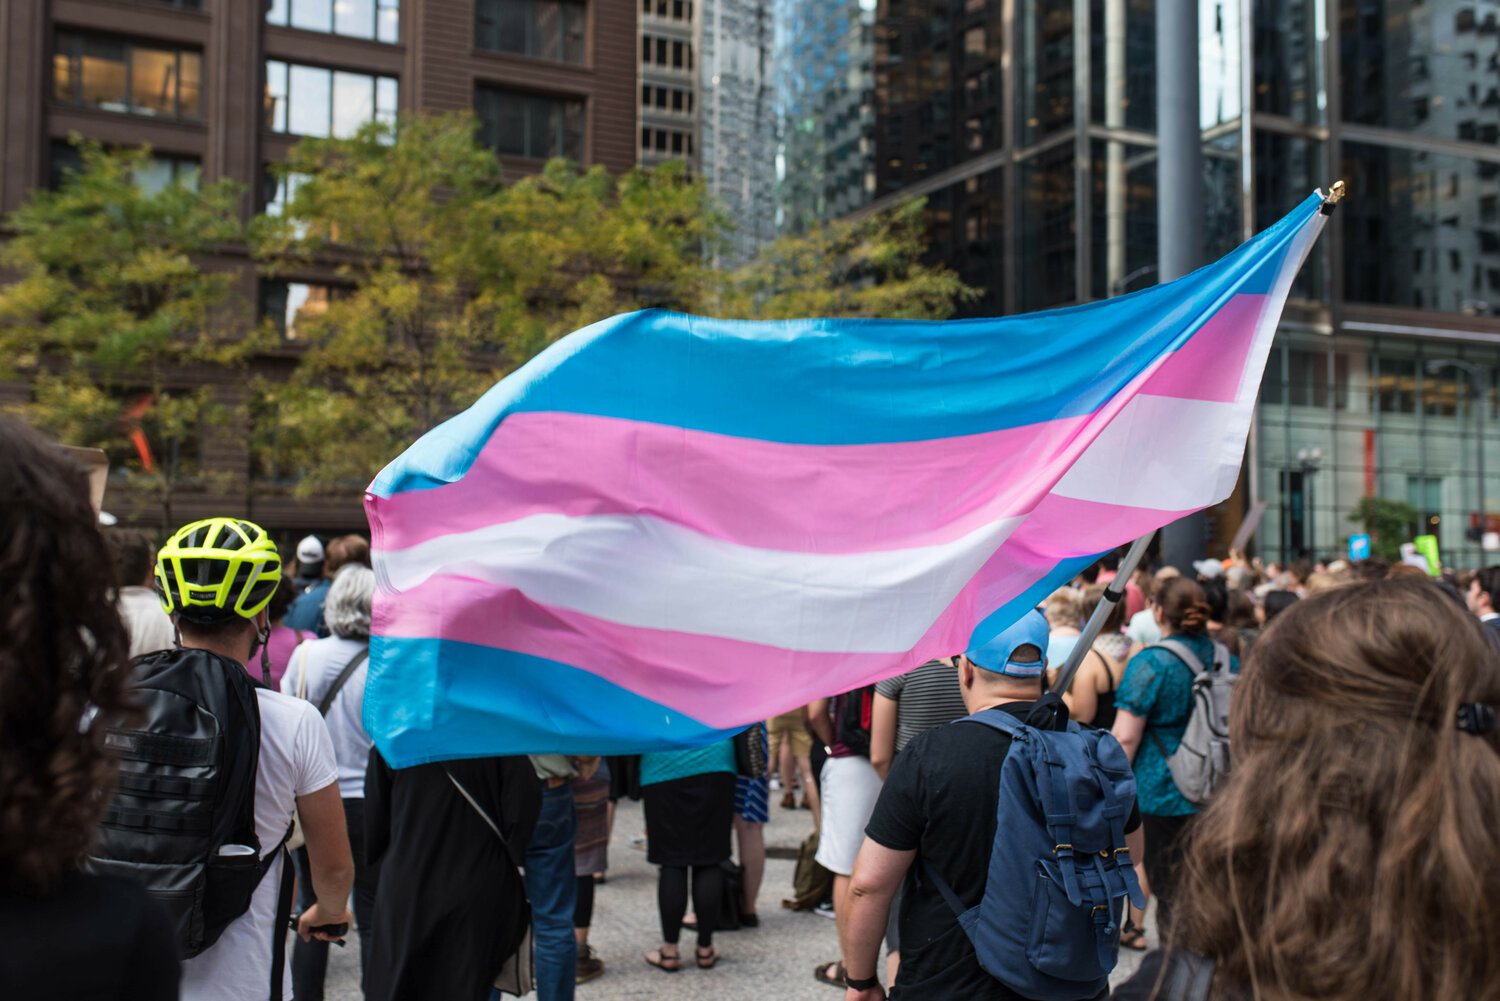 Judge Rules Florida Can't Ban Medicaid Payments for Transgender Care